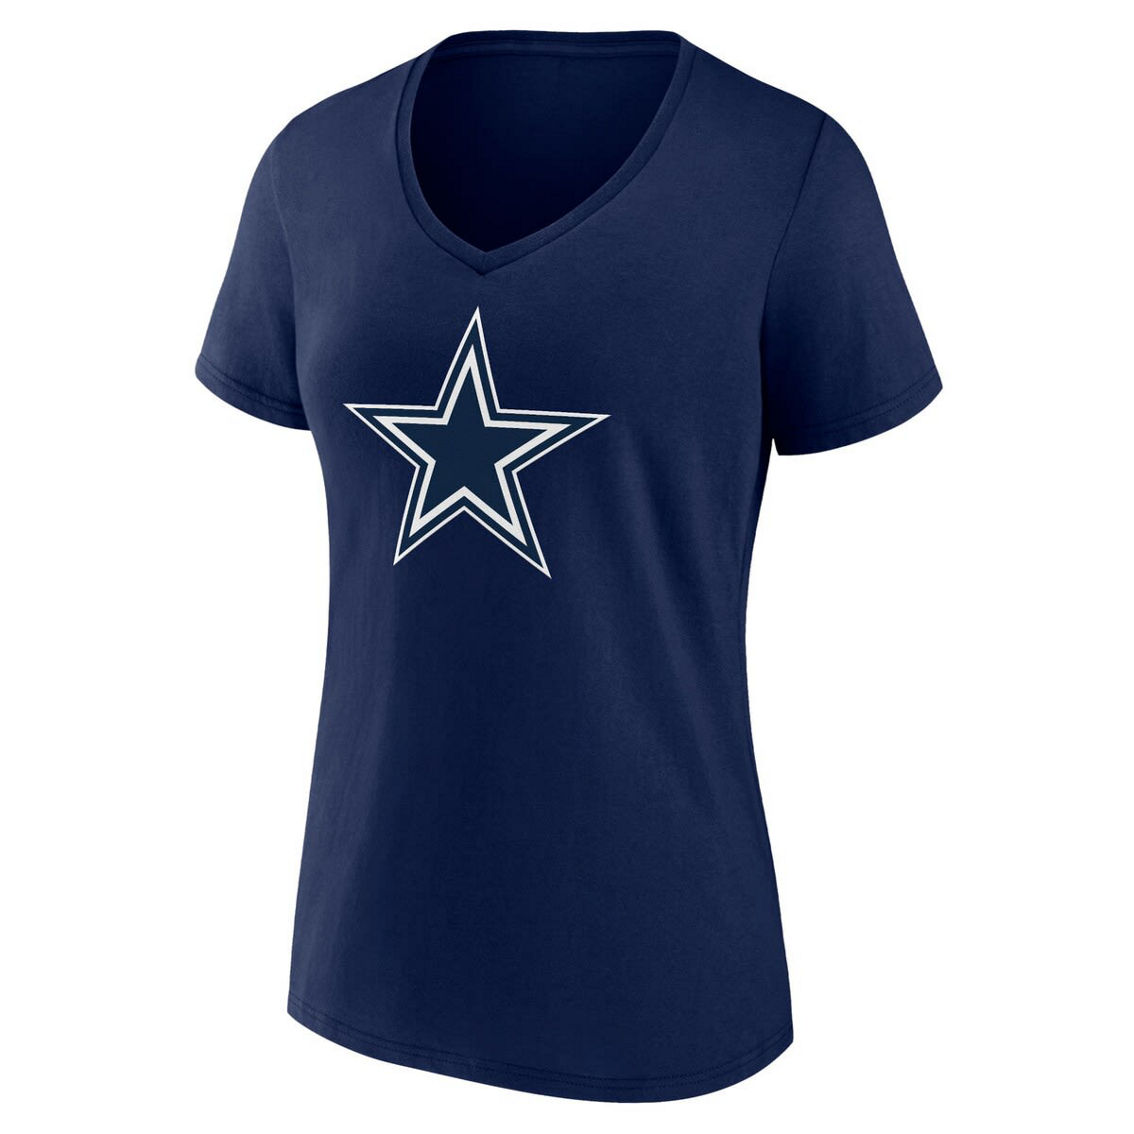 Fanatics Branded Women's Navy Dallas Cowboys Mother's Day V-Neck T-Shirt - Image 3 of 4